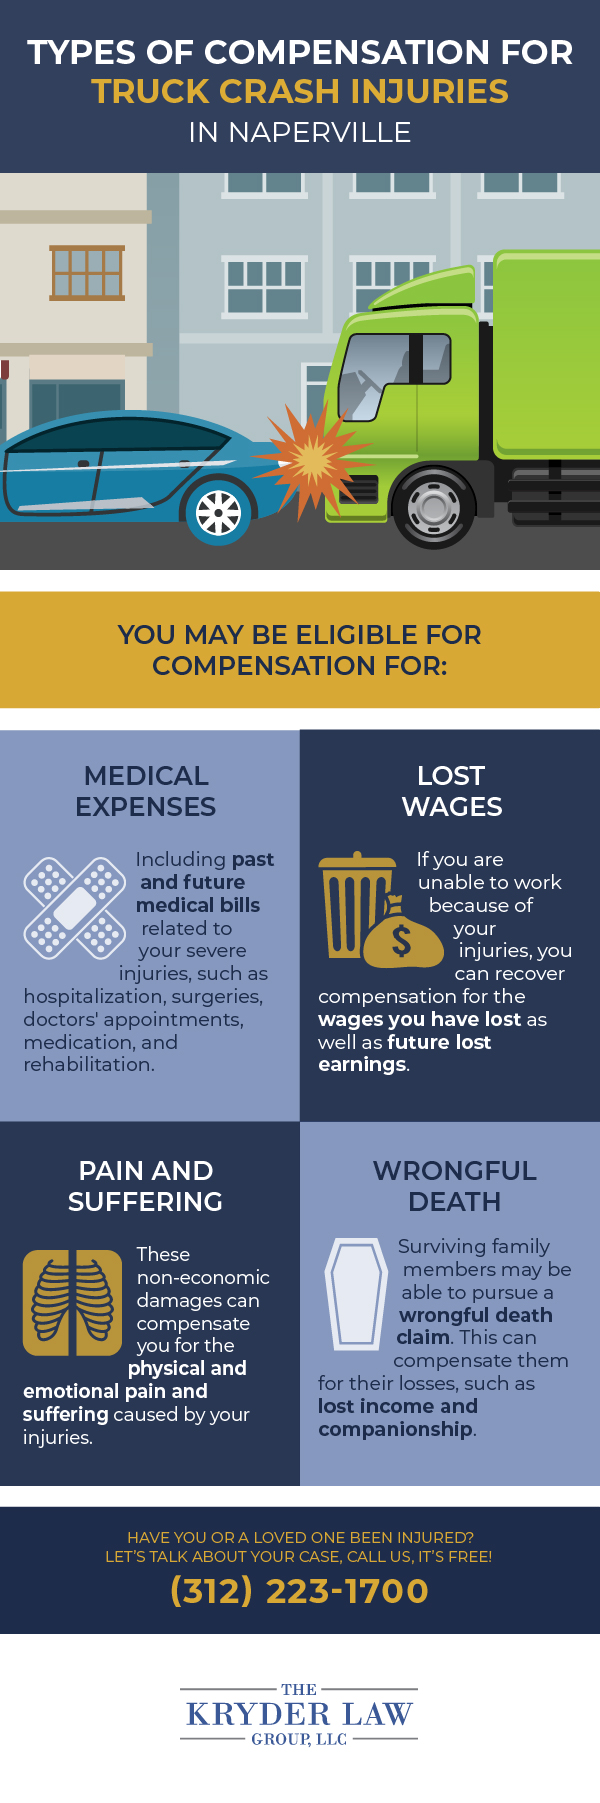 Types of Compensation for Truck Crash Injuries in Naperville Infographic